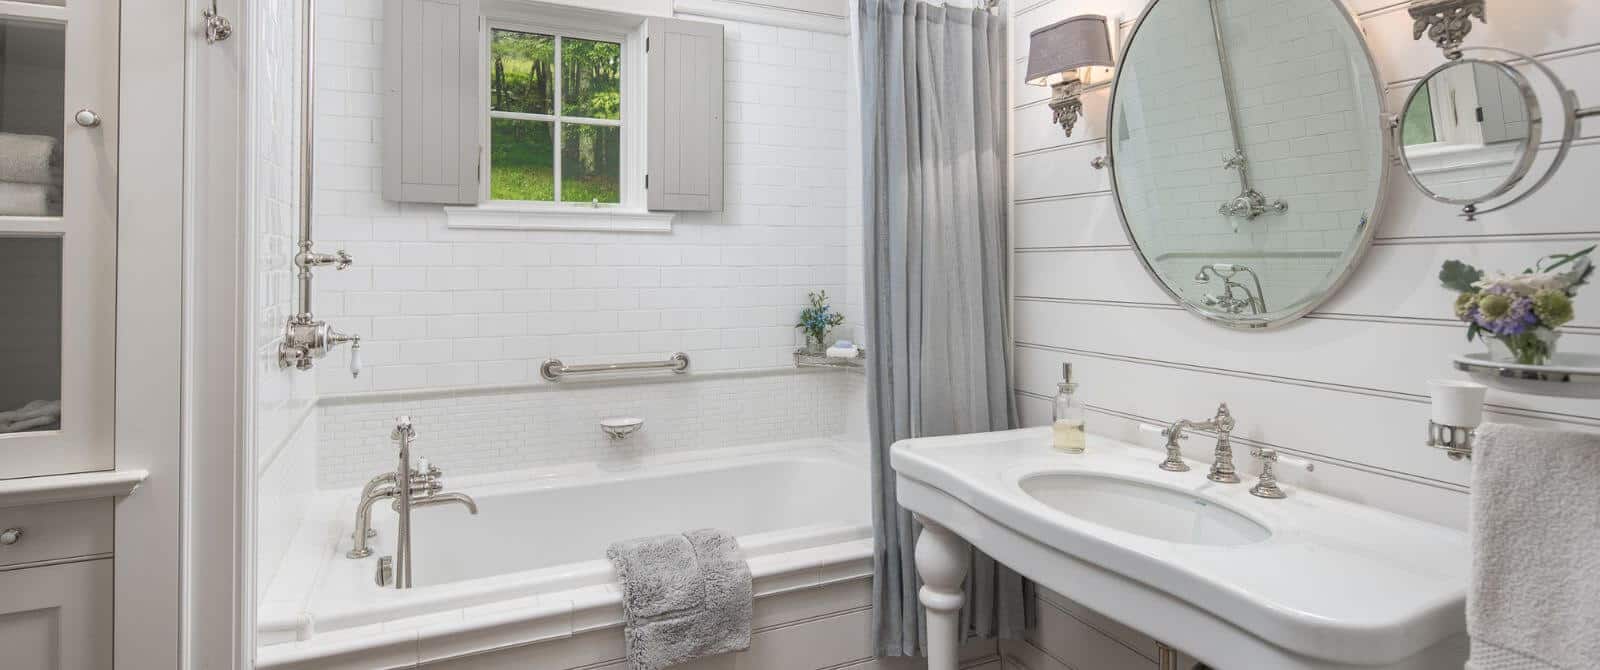 Elegant white bathroom with shiplap walls, pedestal sink, round mirror and shower with tub and grey curtain